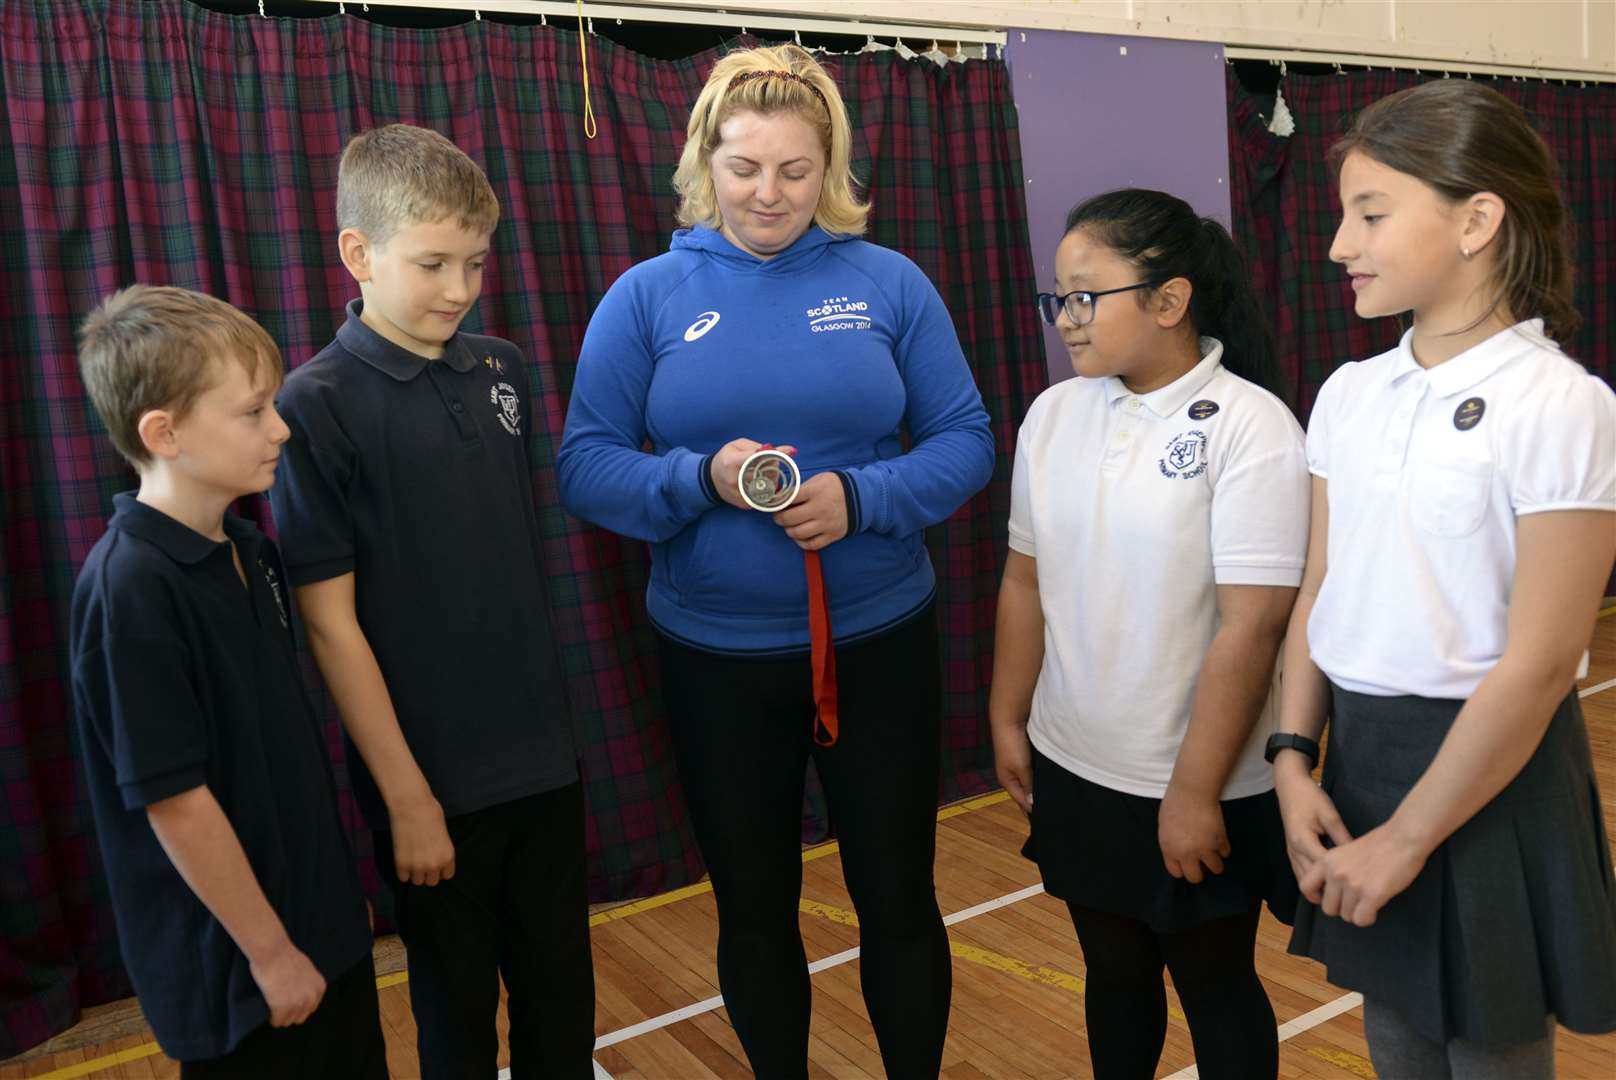 Steph Inglis shows her silver Commonwealth Games medal to young students.